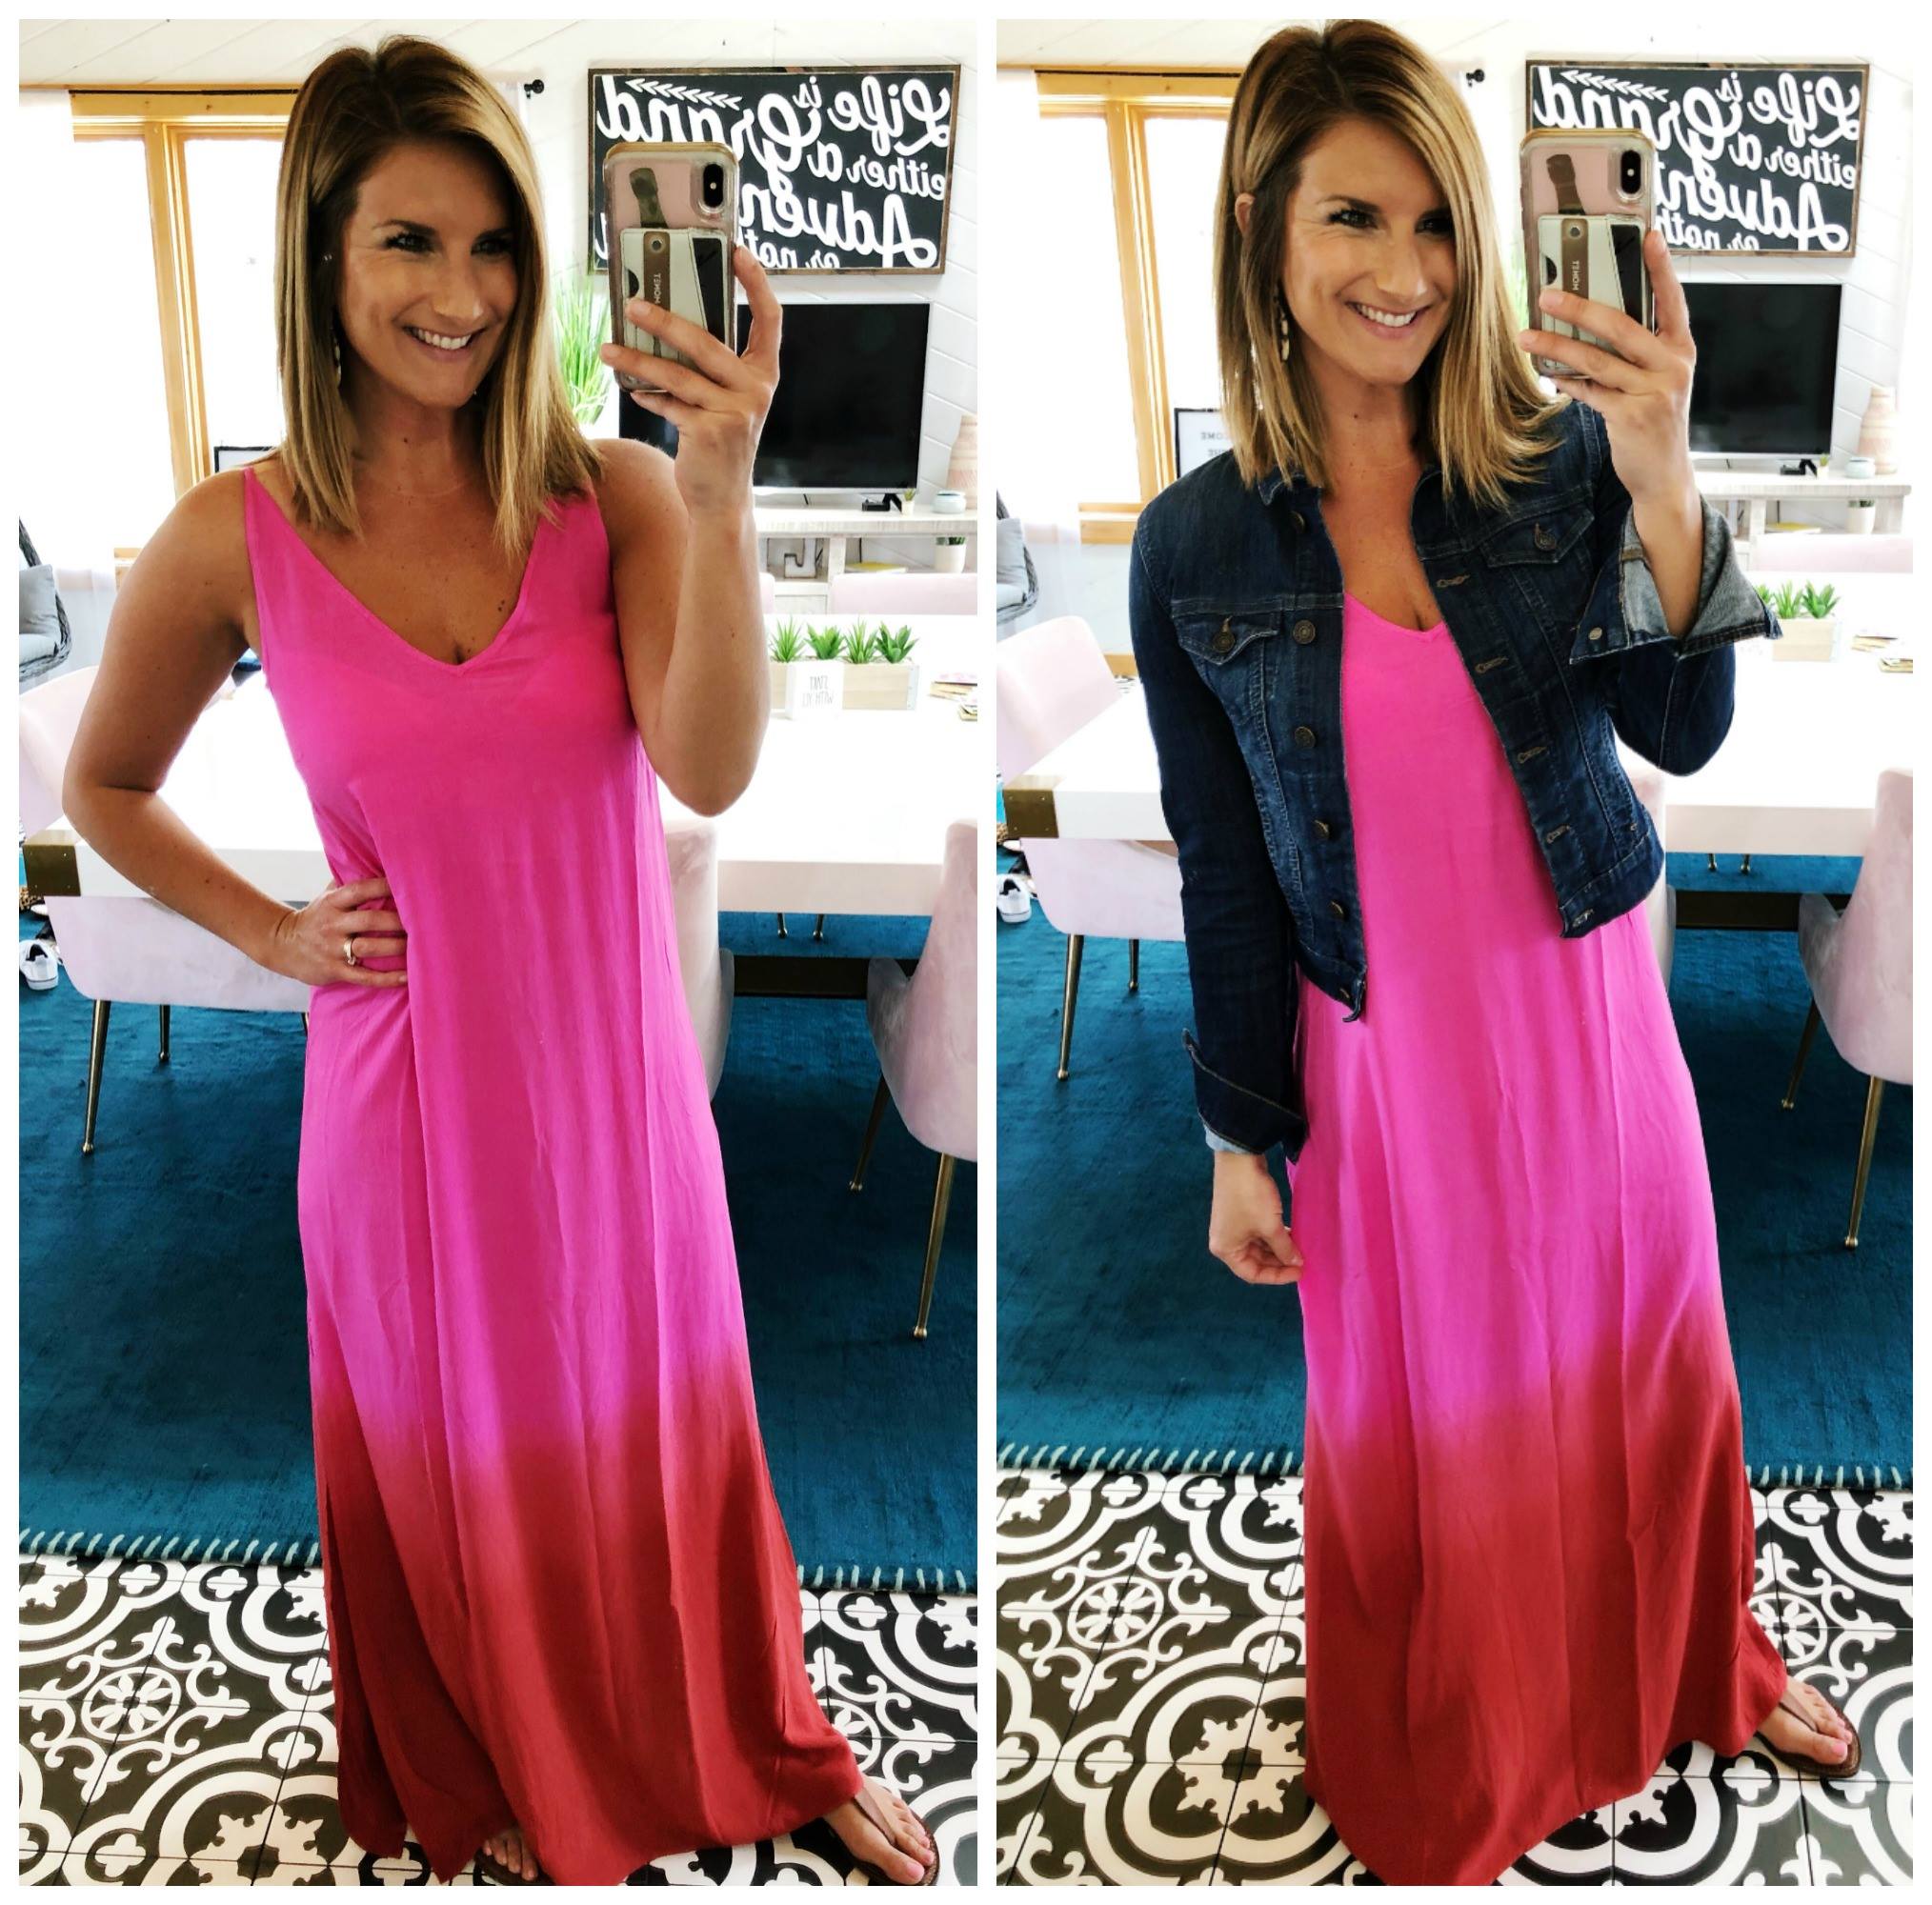 How to style a maxi dress // Spring Dress // Maxi Dress with denim jacket and sandals // Outfit of the Day